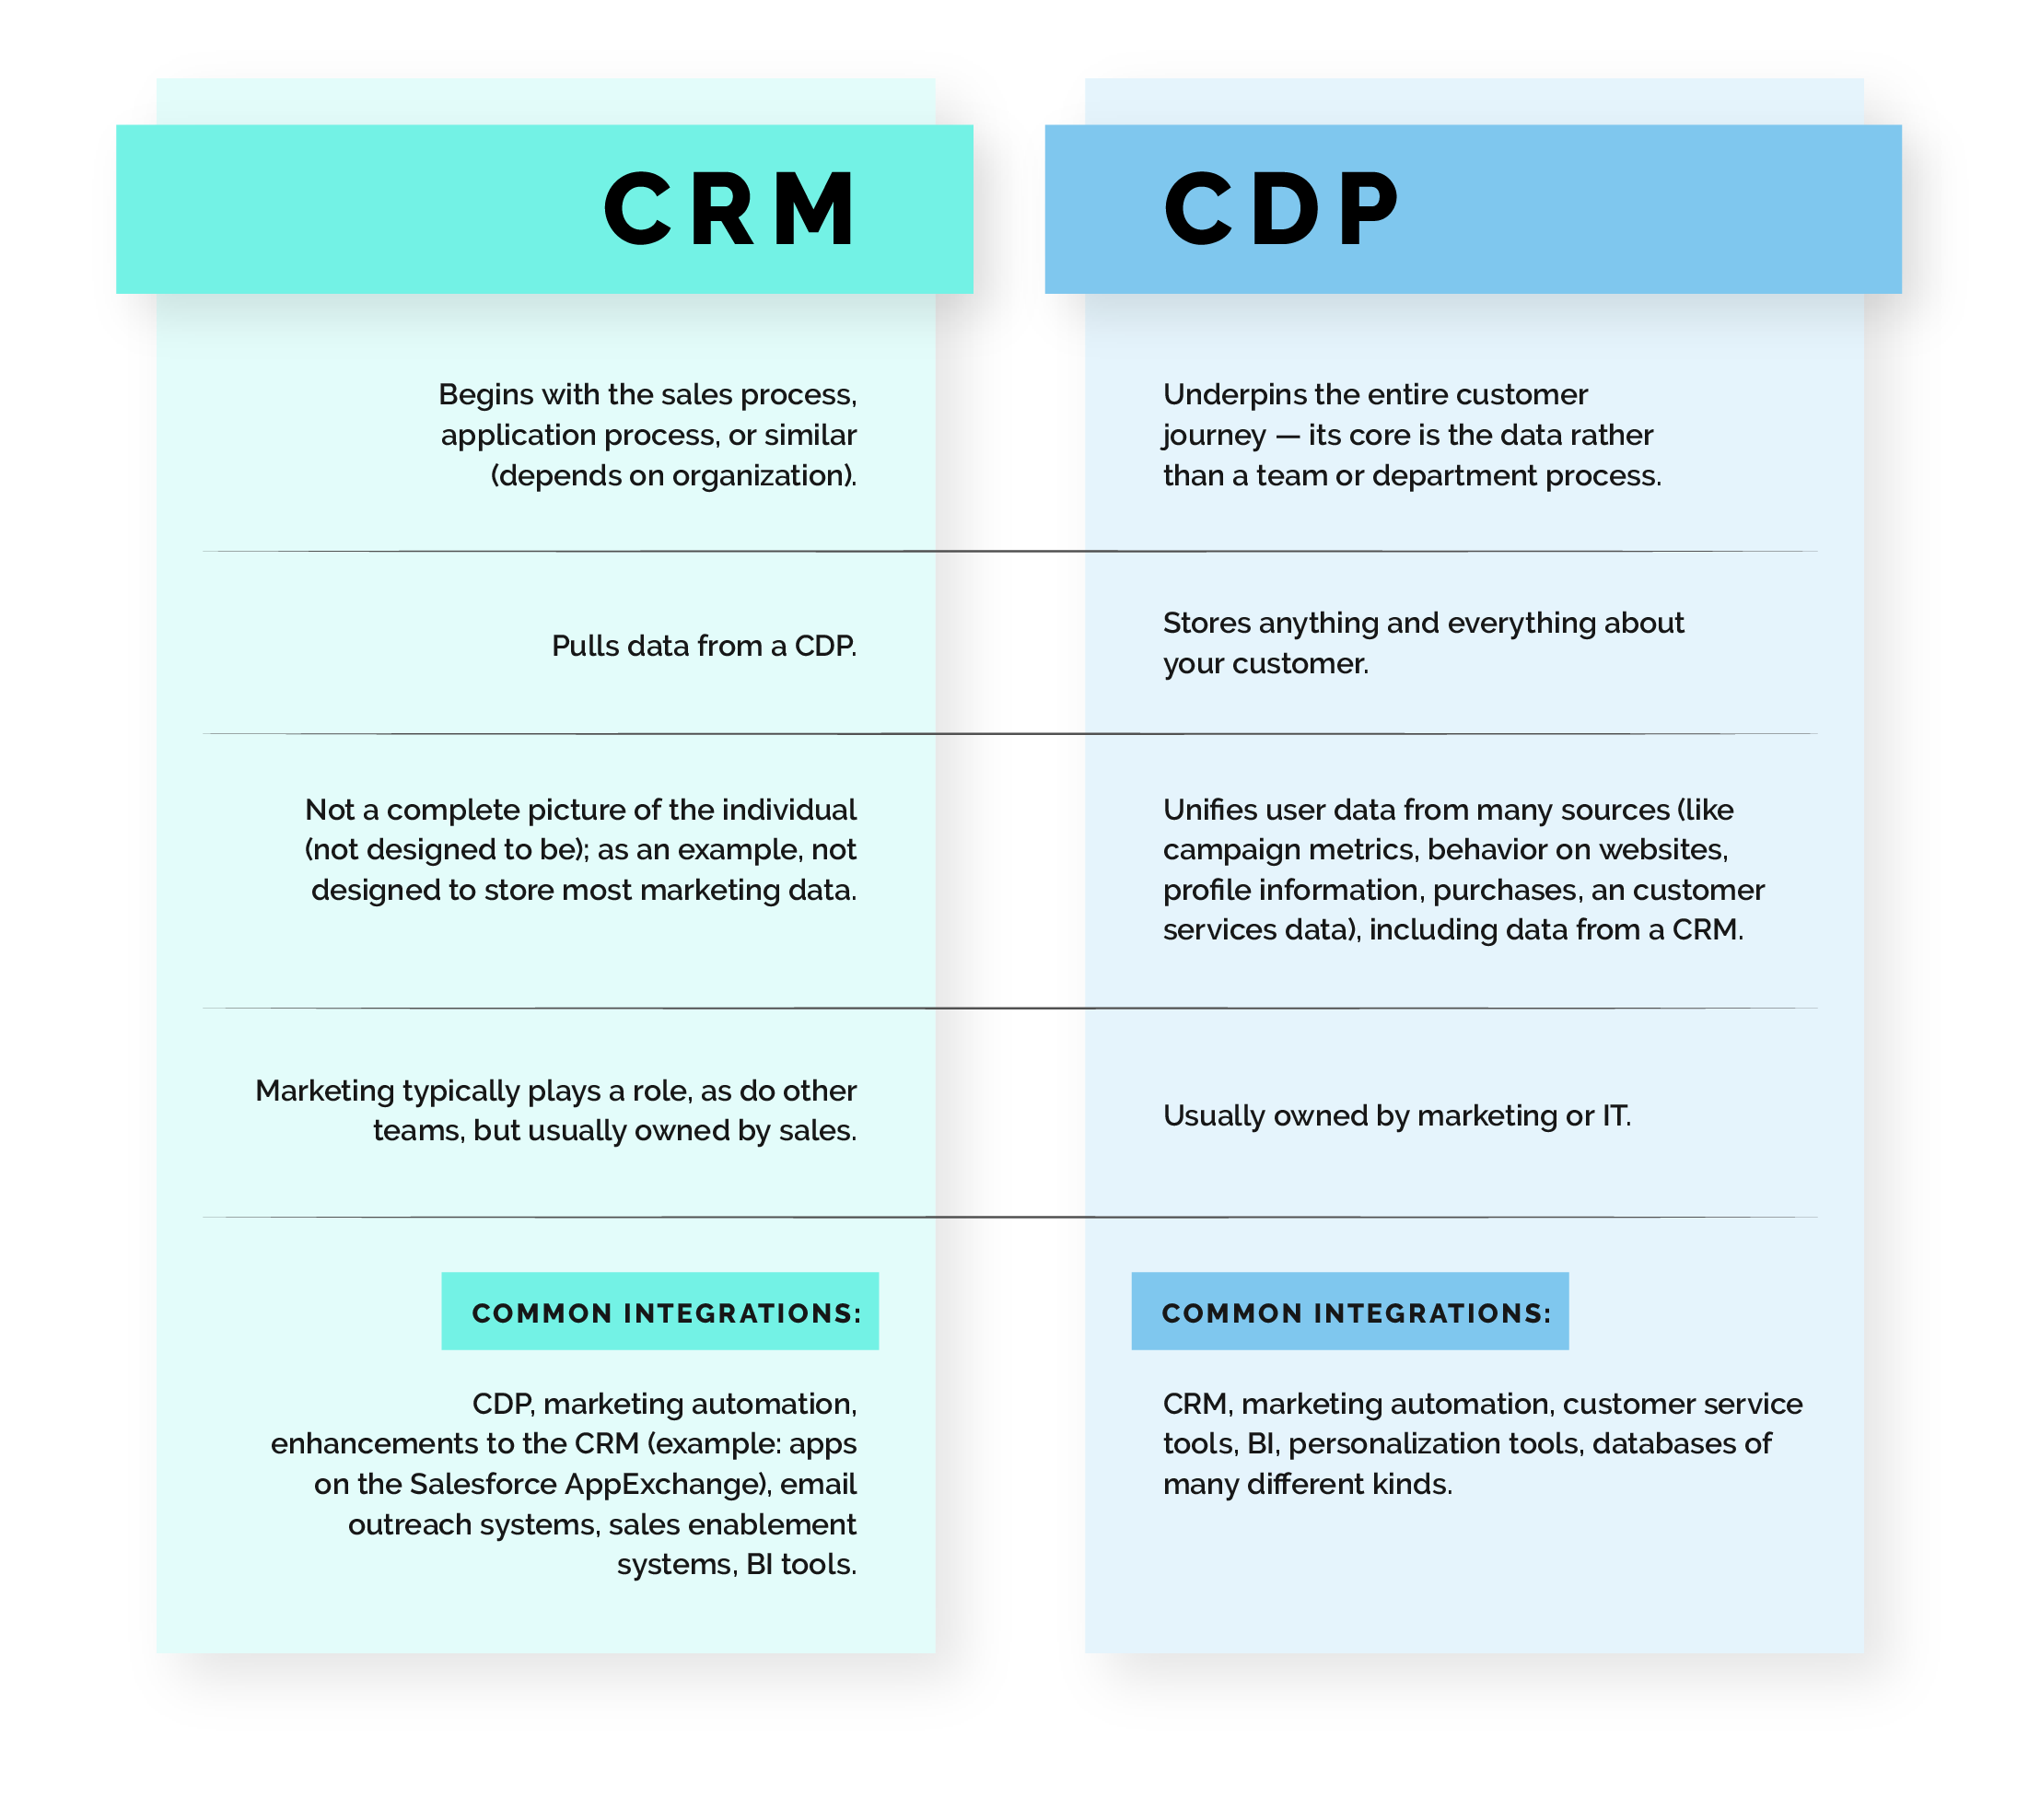 A chart outlining key differences between a CRM and CDP